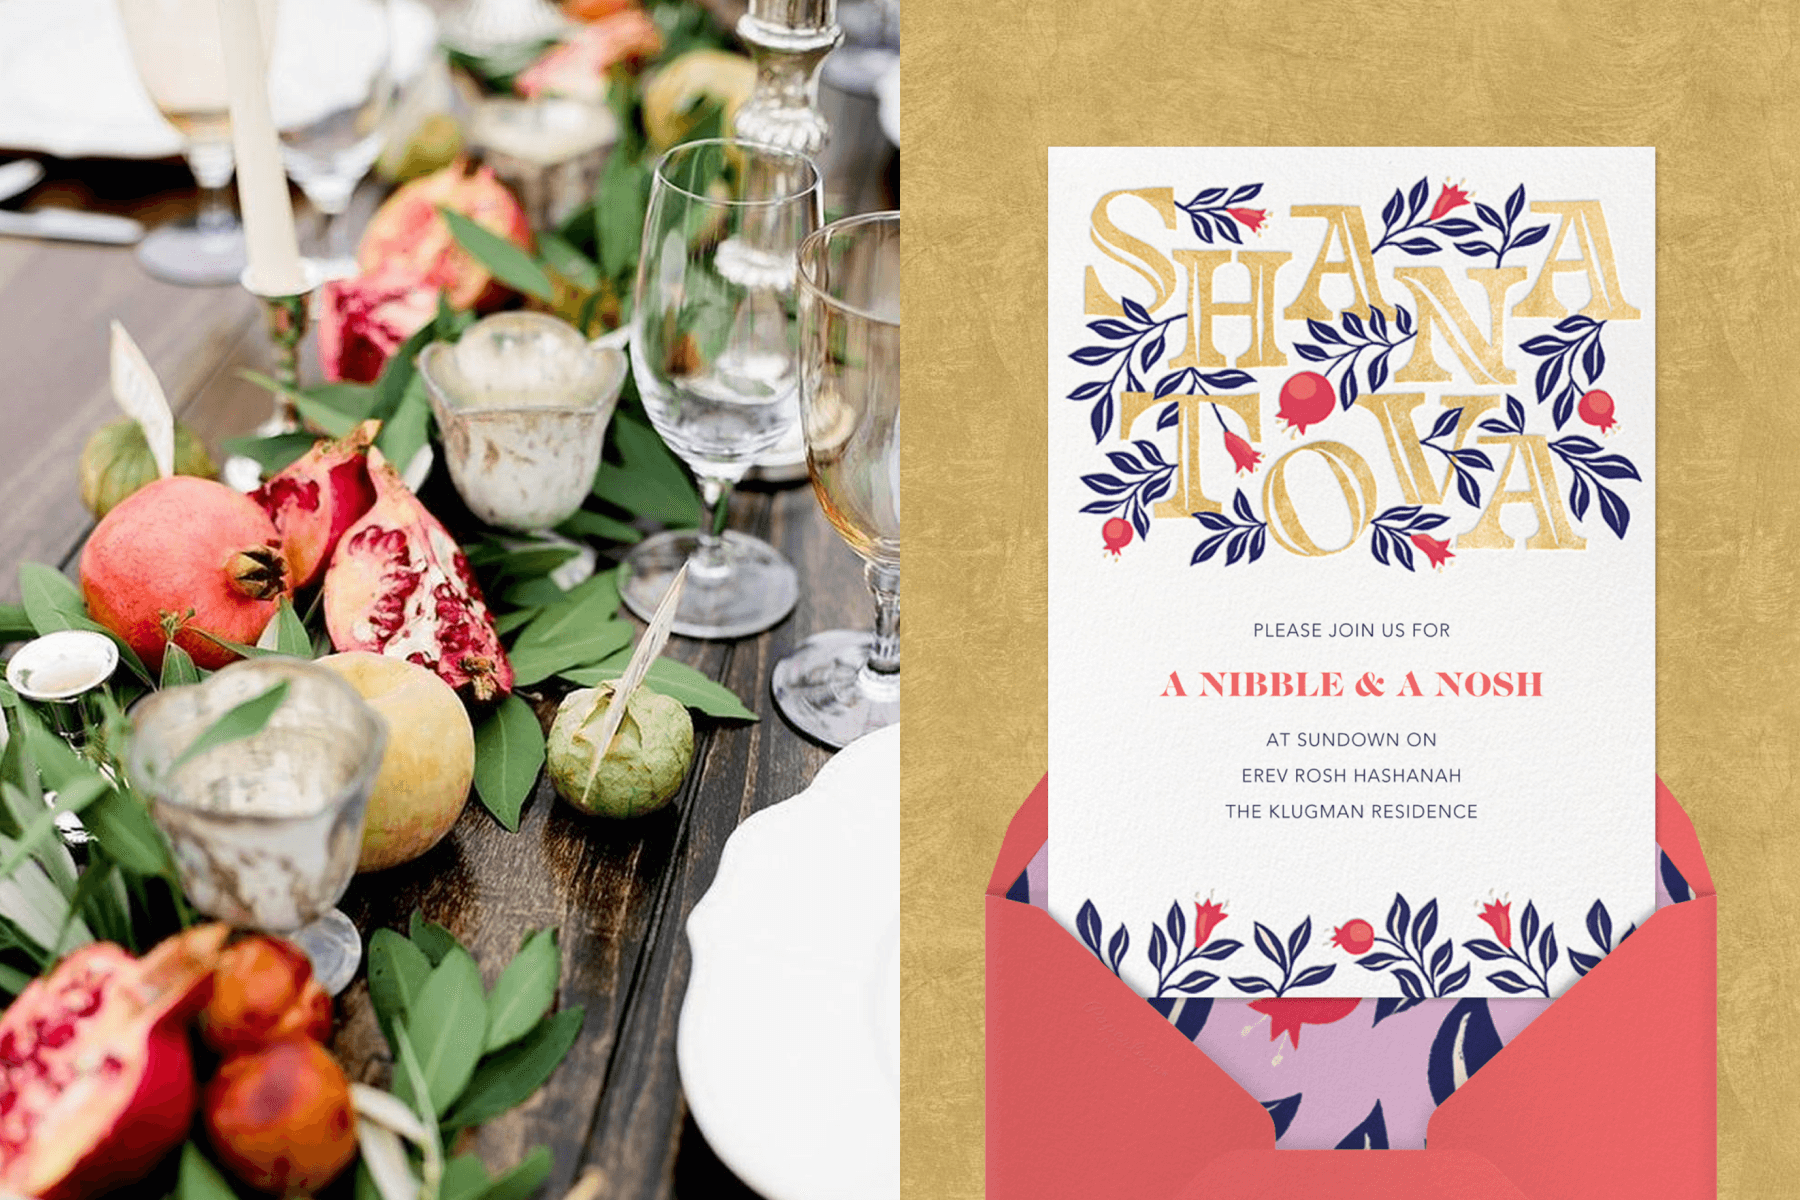 Left: A table arrangement of leaves and pomegranates. Right: A Rosh Hashanah invitation with the words “Shana Tova” in gold with illustrations of pomegranates.